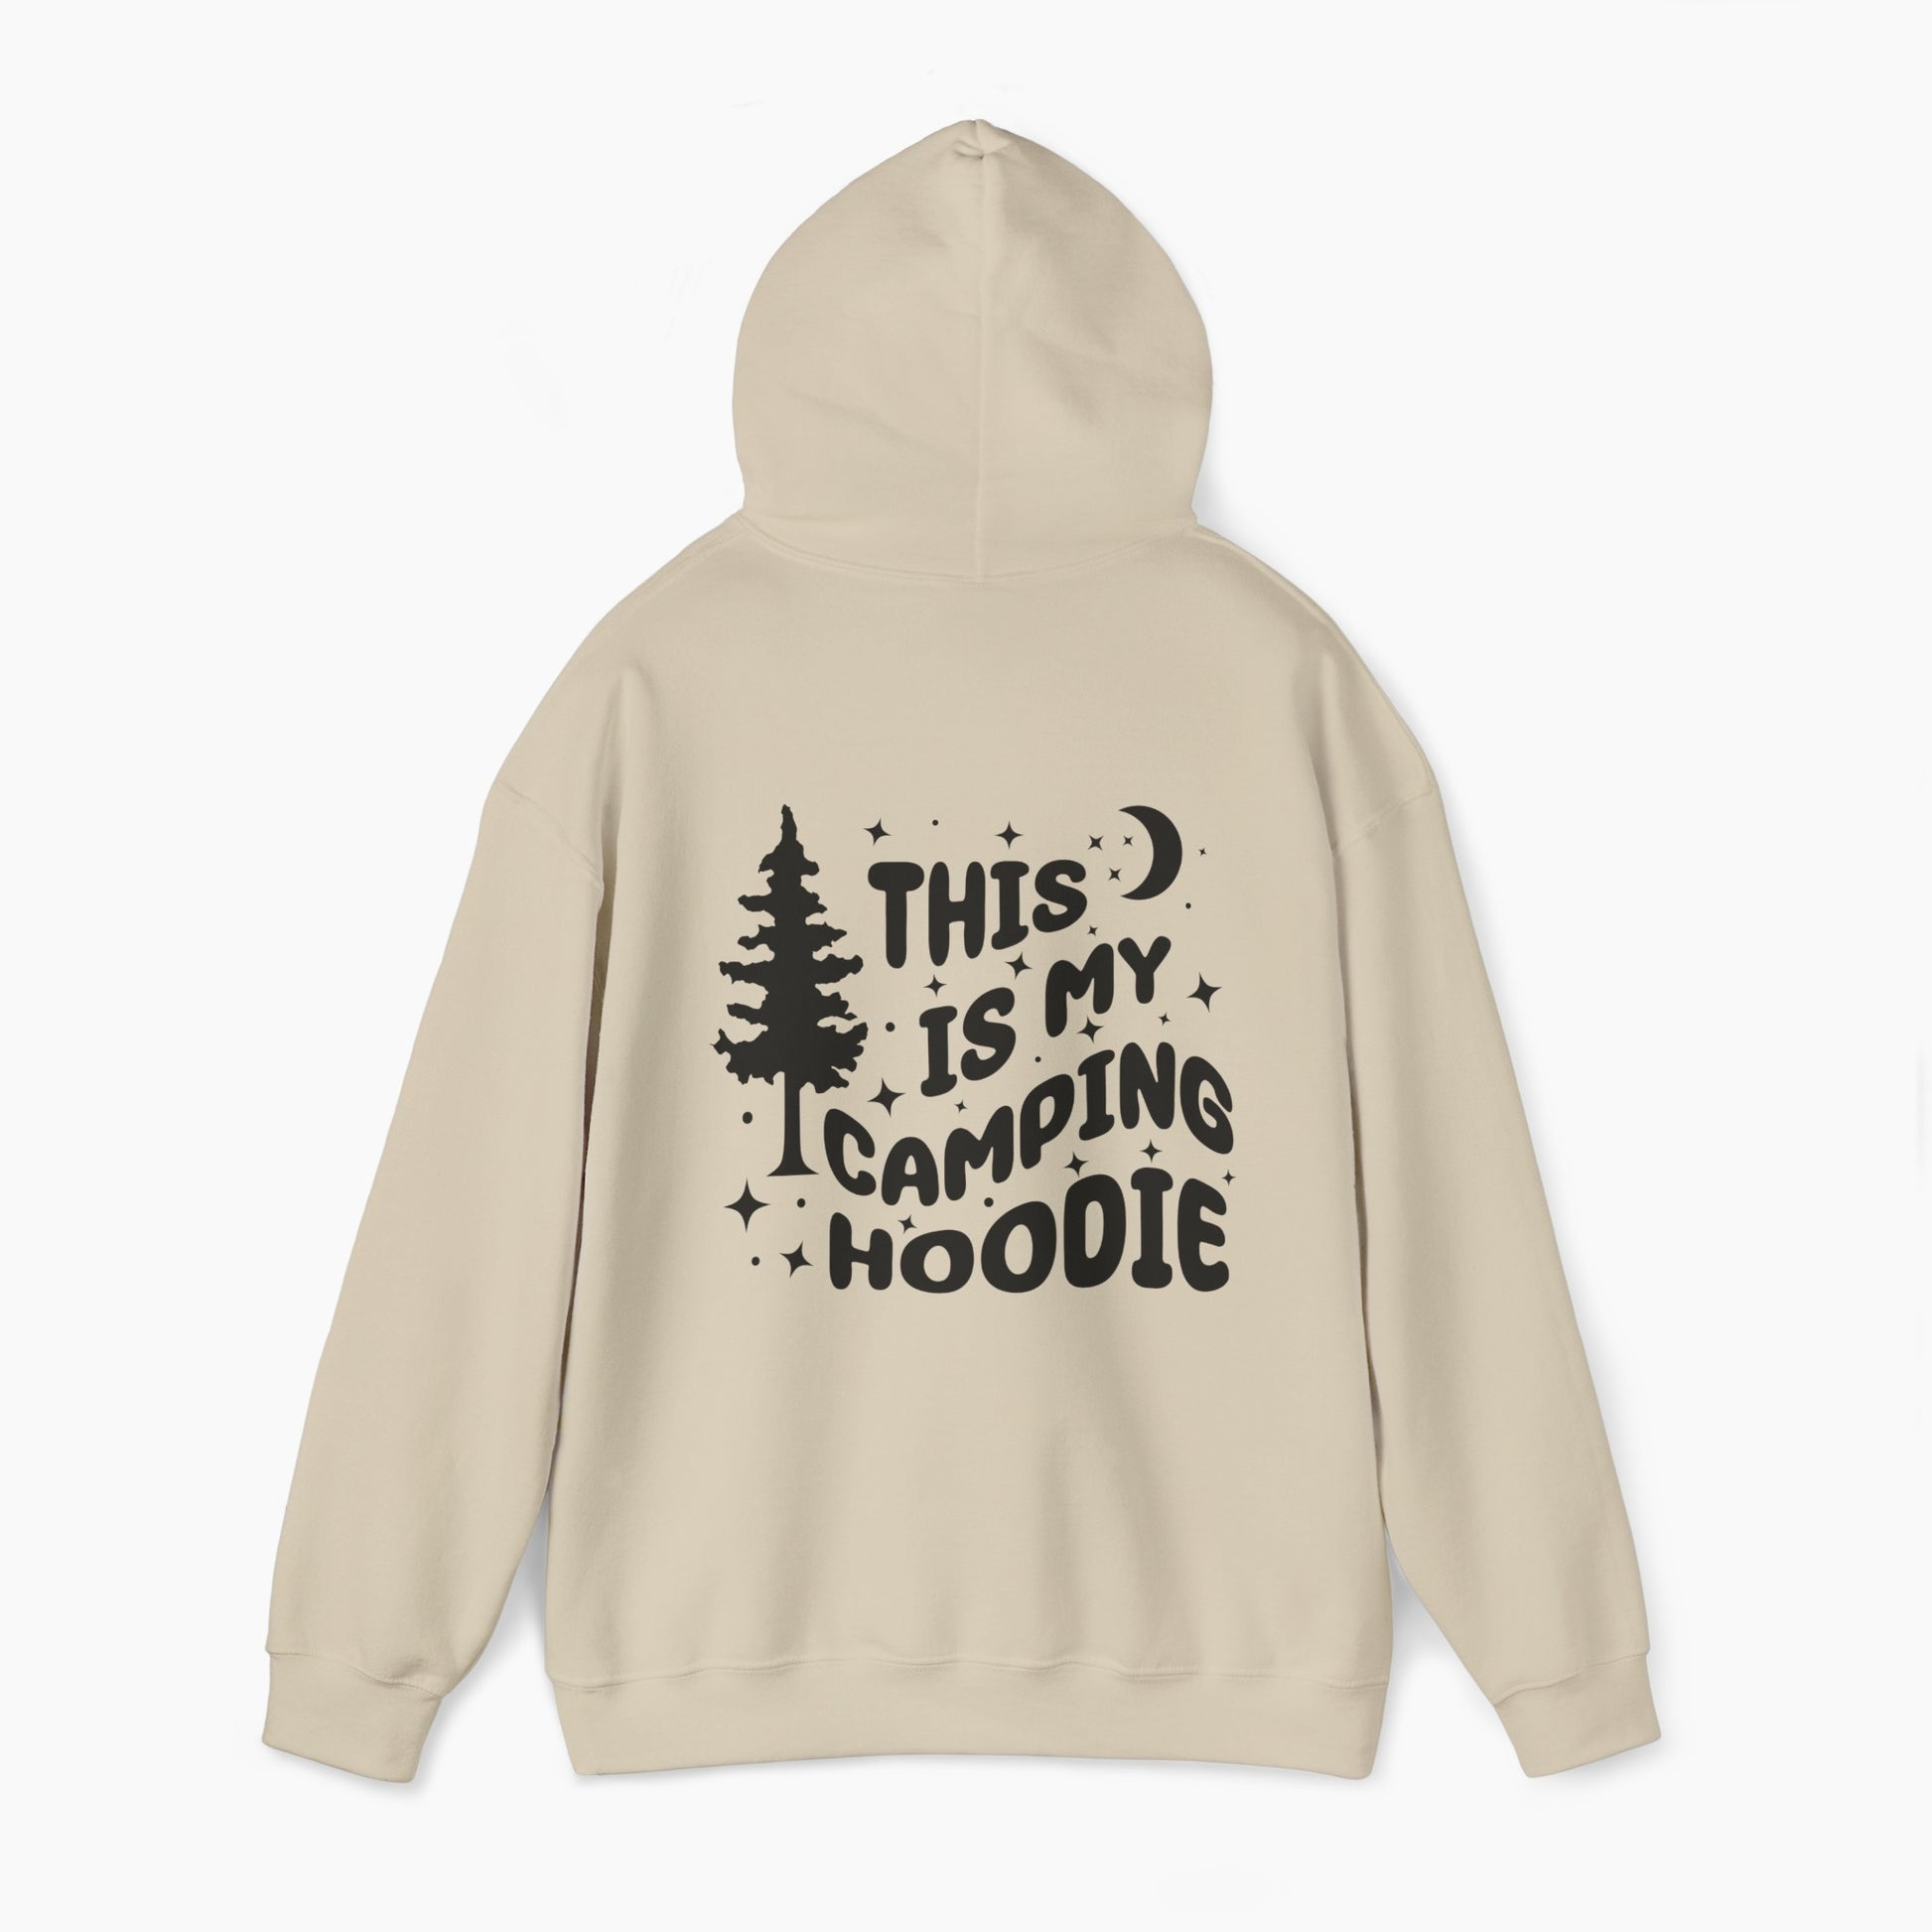 Back of sand color hoodie featuring the text 'This is my camping hoodie,' with a design of a camping van, moon, stars, and a tree on a plain background.